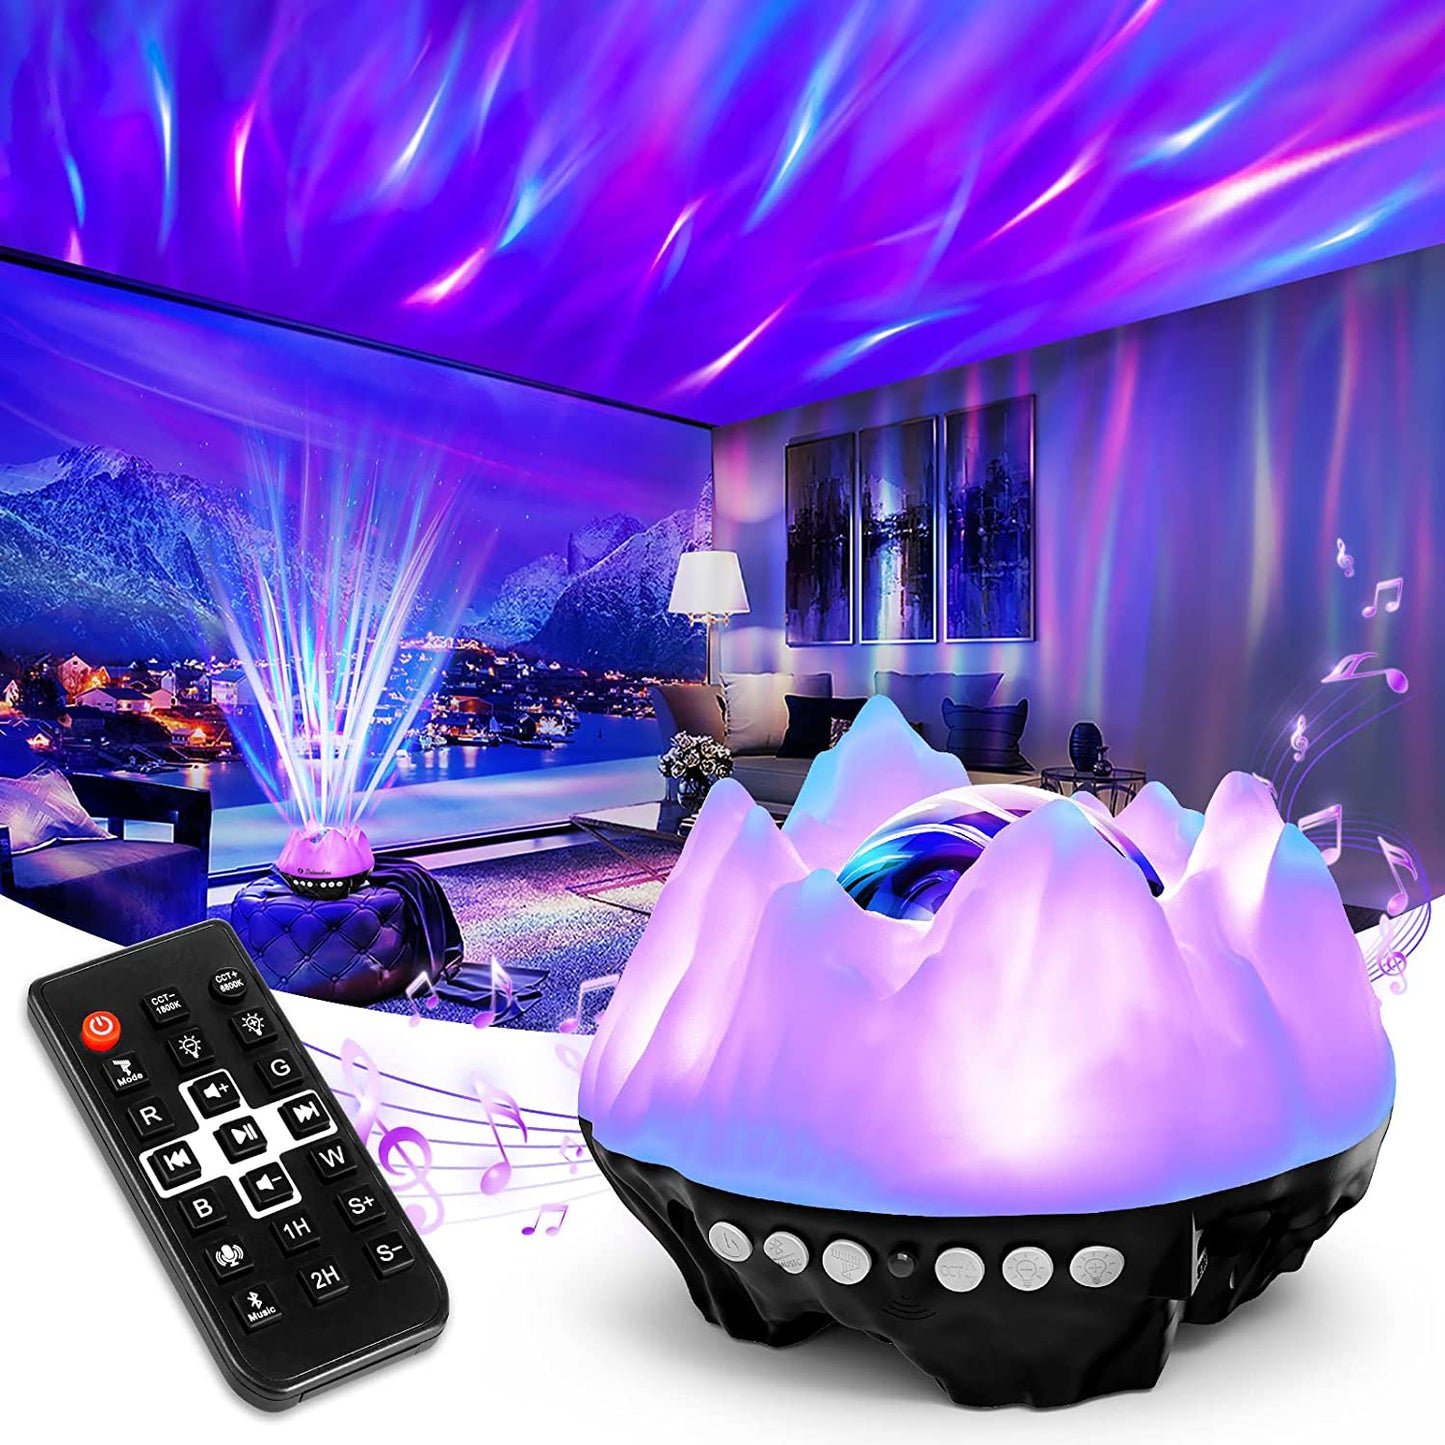 Galaxy Projector Star Projector Night Light Work with Alexa Google Home 8 in 1 Smart WiFi Music Galaxy Light Projector Bluetooth Remote Timer